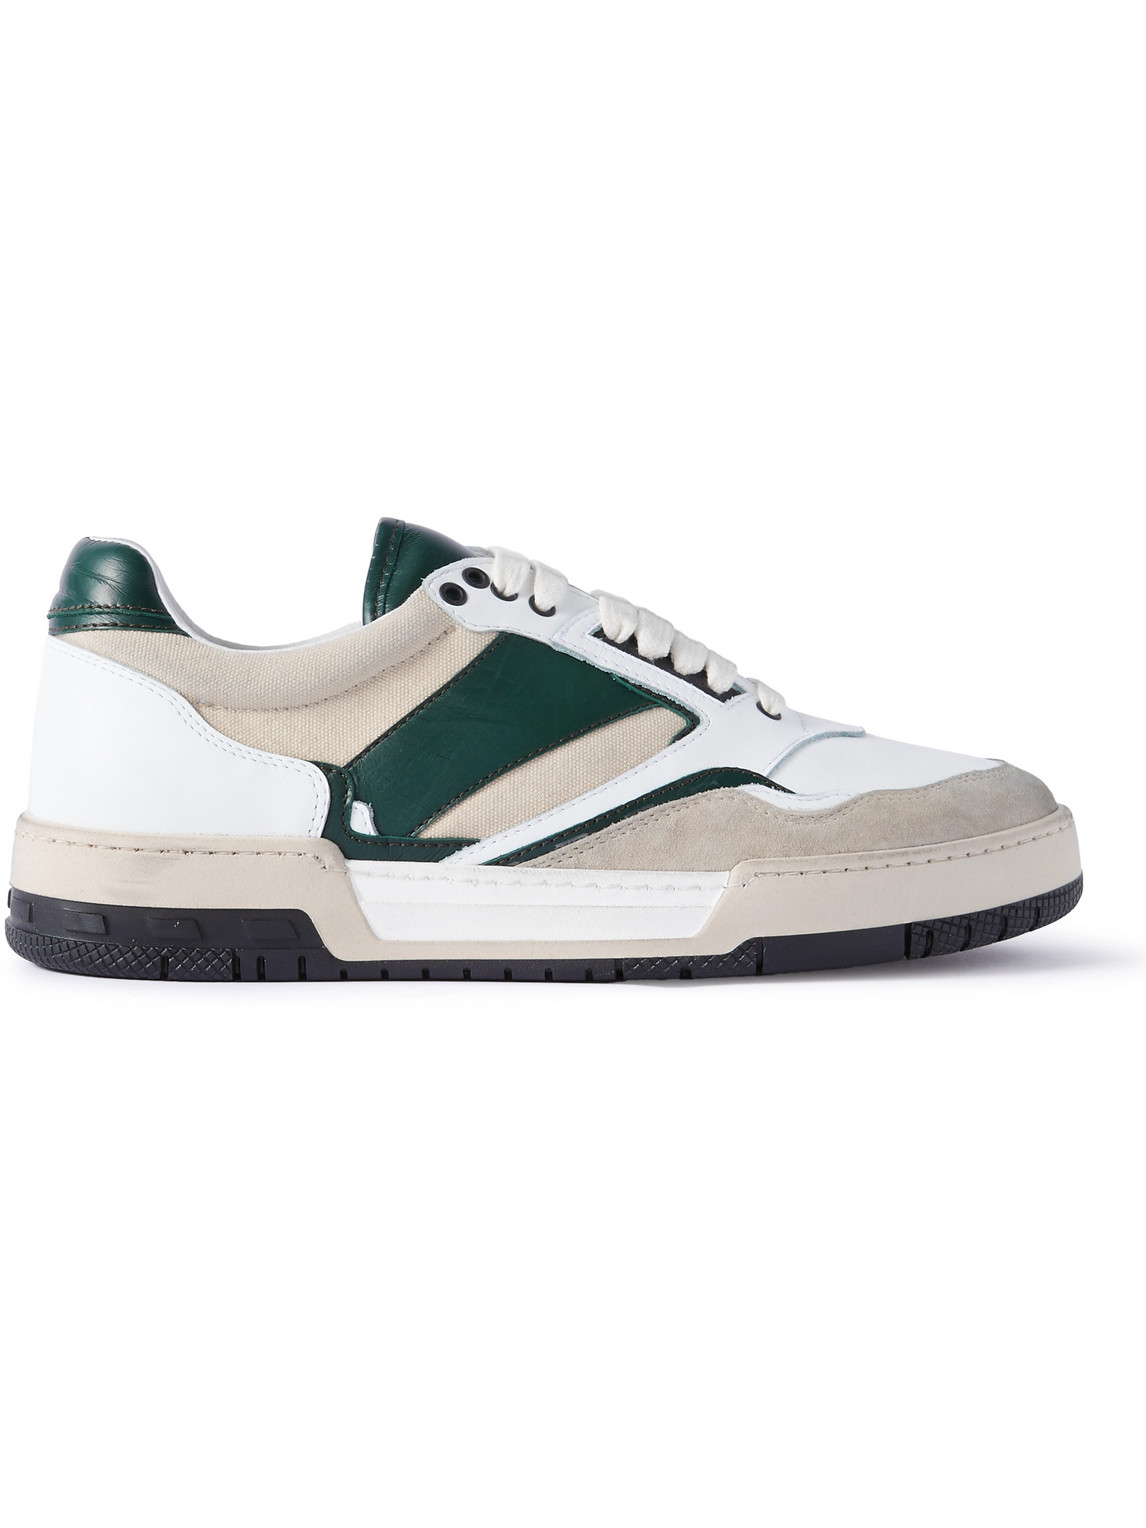 Rhude - Racing Distressed Suede and Leather Sneakers - Men - White - US 7 von Rhude